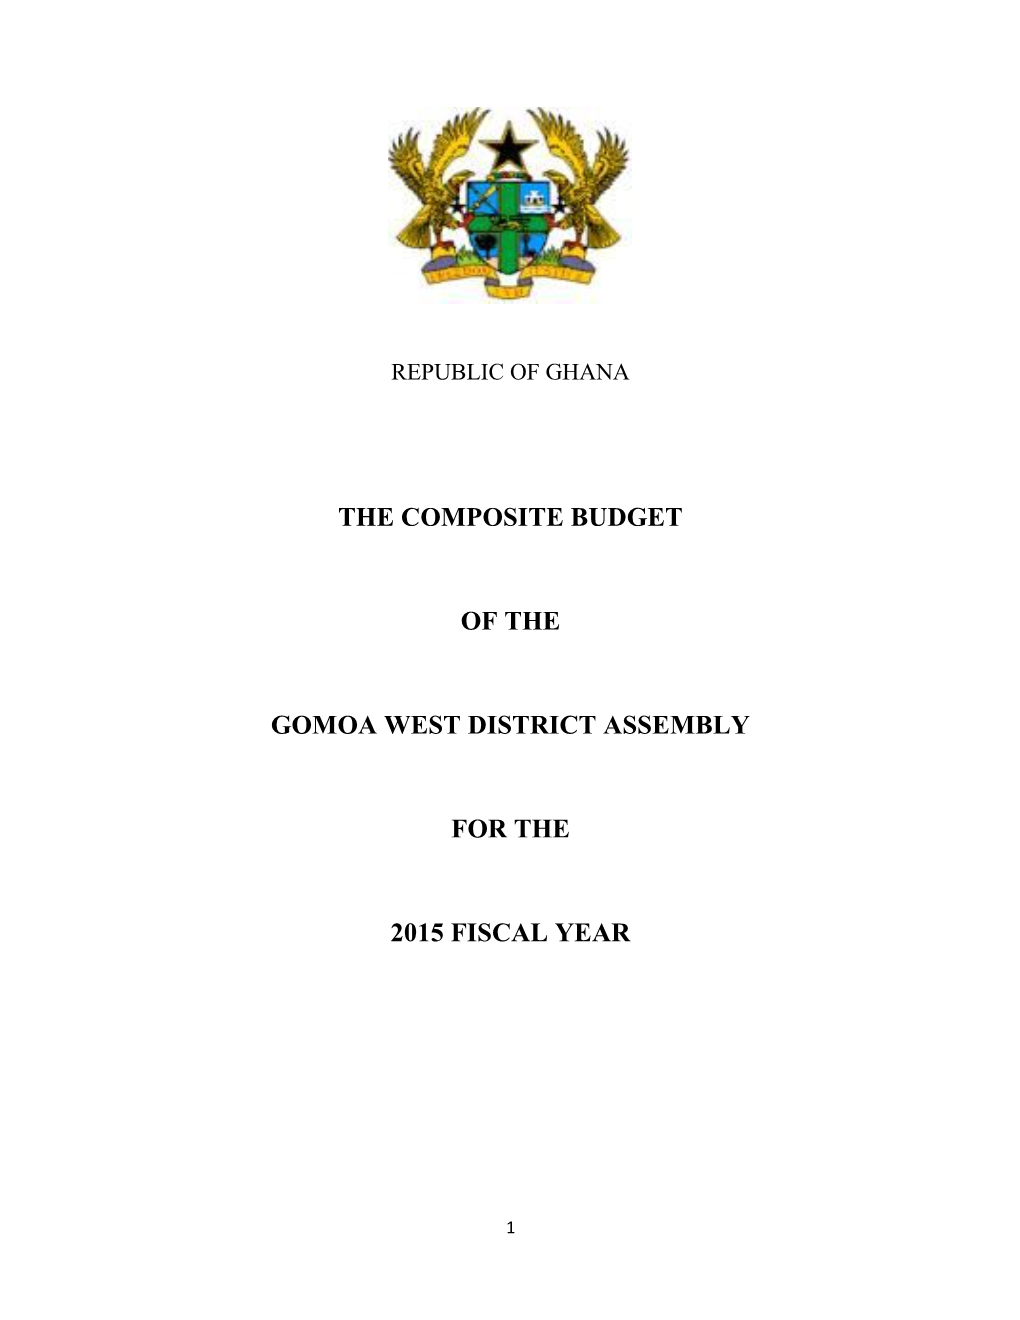 The Composite Budget of the Gomoa West District Assembly for the 2015 Fiscal Year